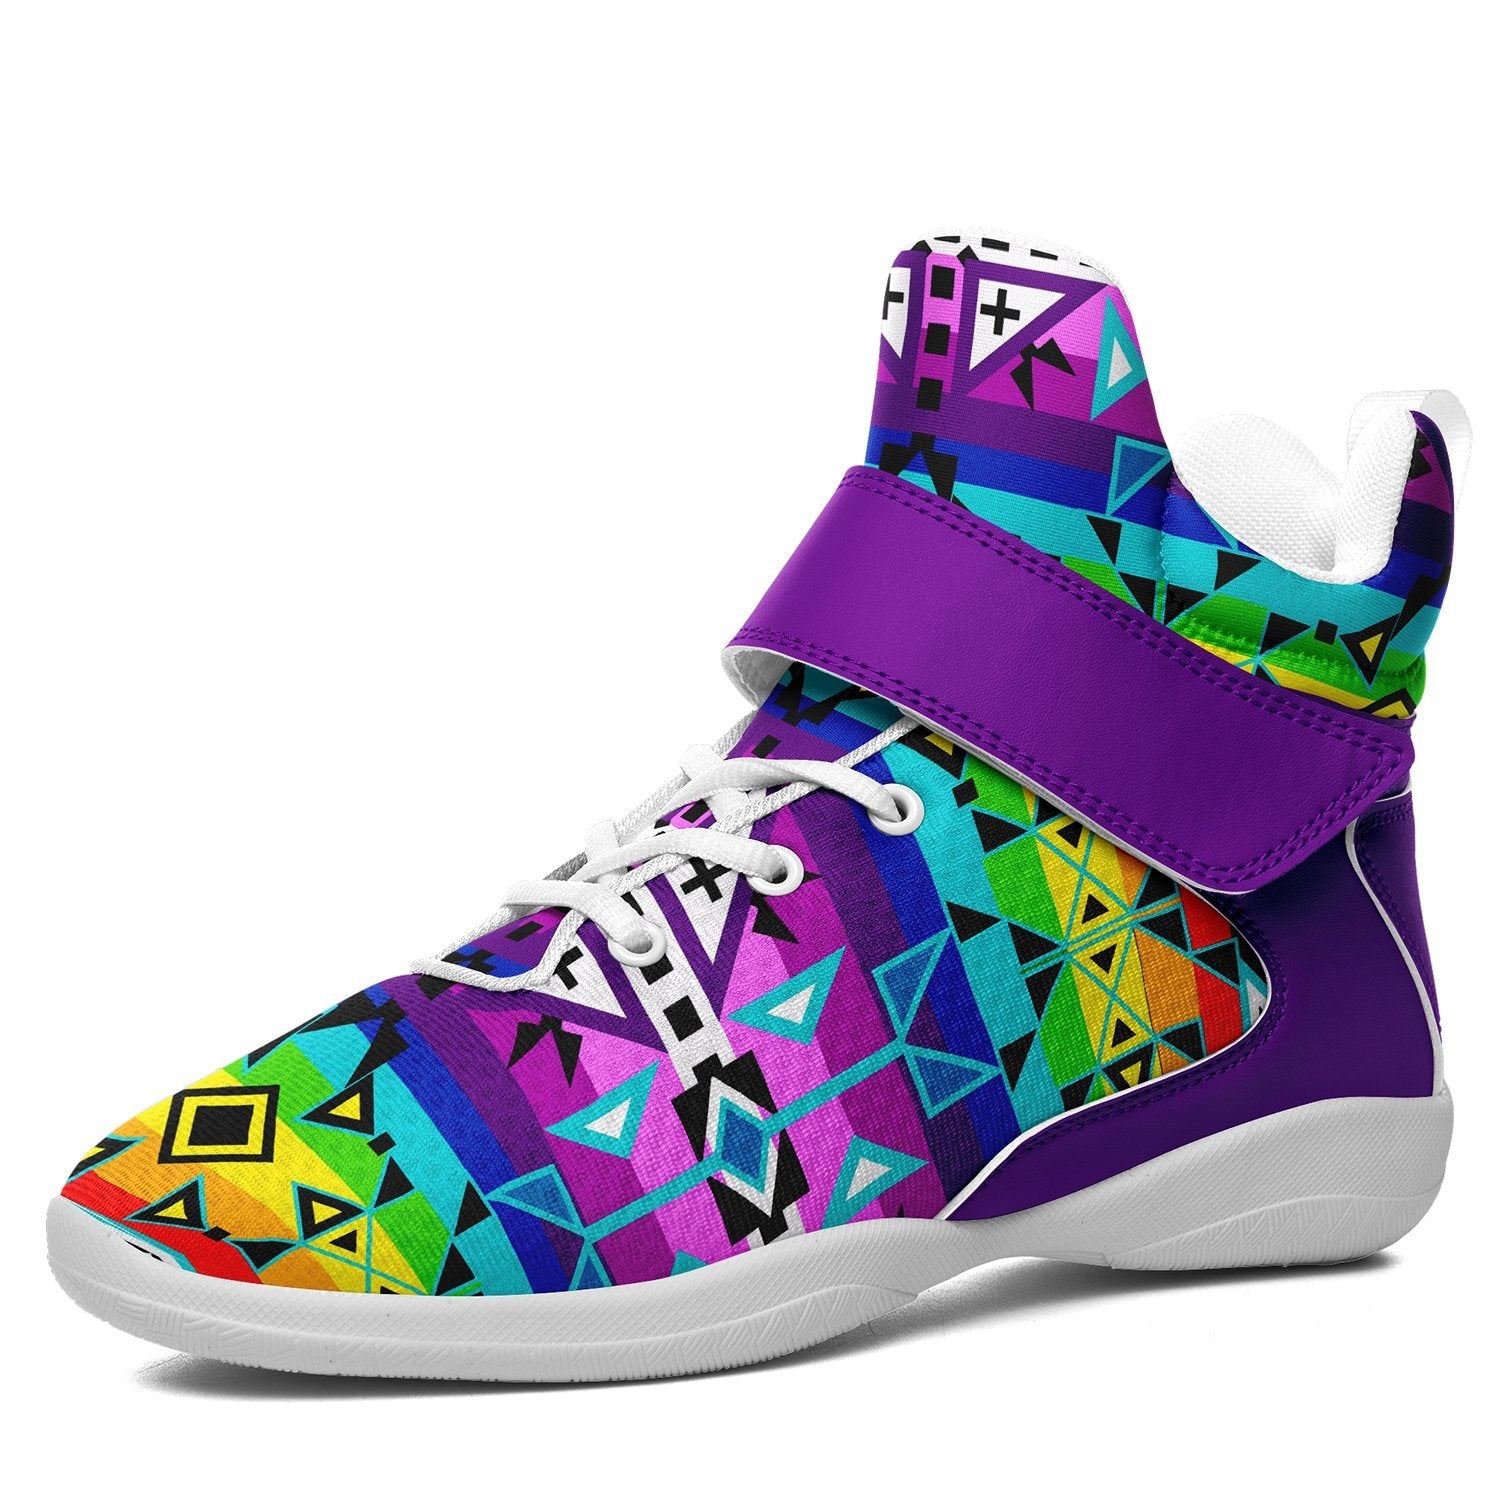 After the Rain Ipottaa Basketball / Sport High Top Shoes 49 Dzine US Women 4.5 / US Youth 3.5 / EUR 35 White Sole with Indigo Strap 